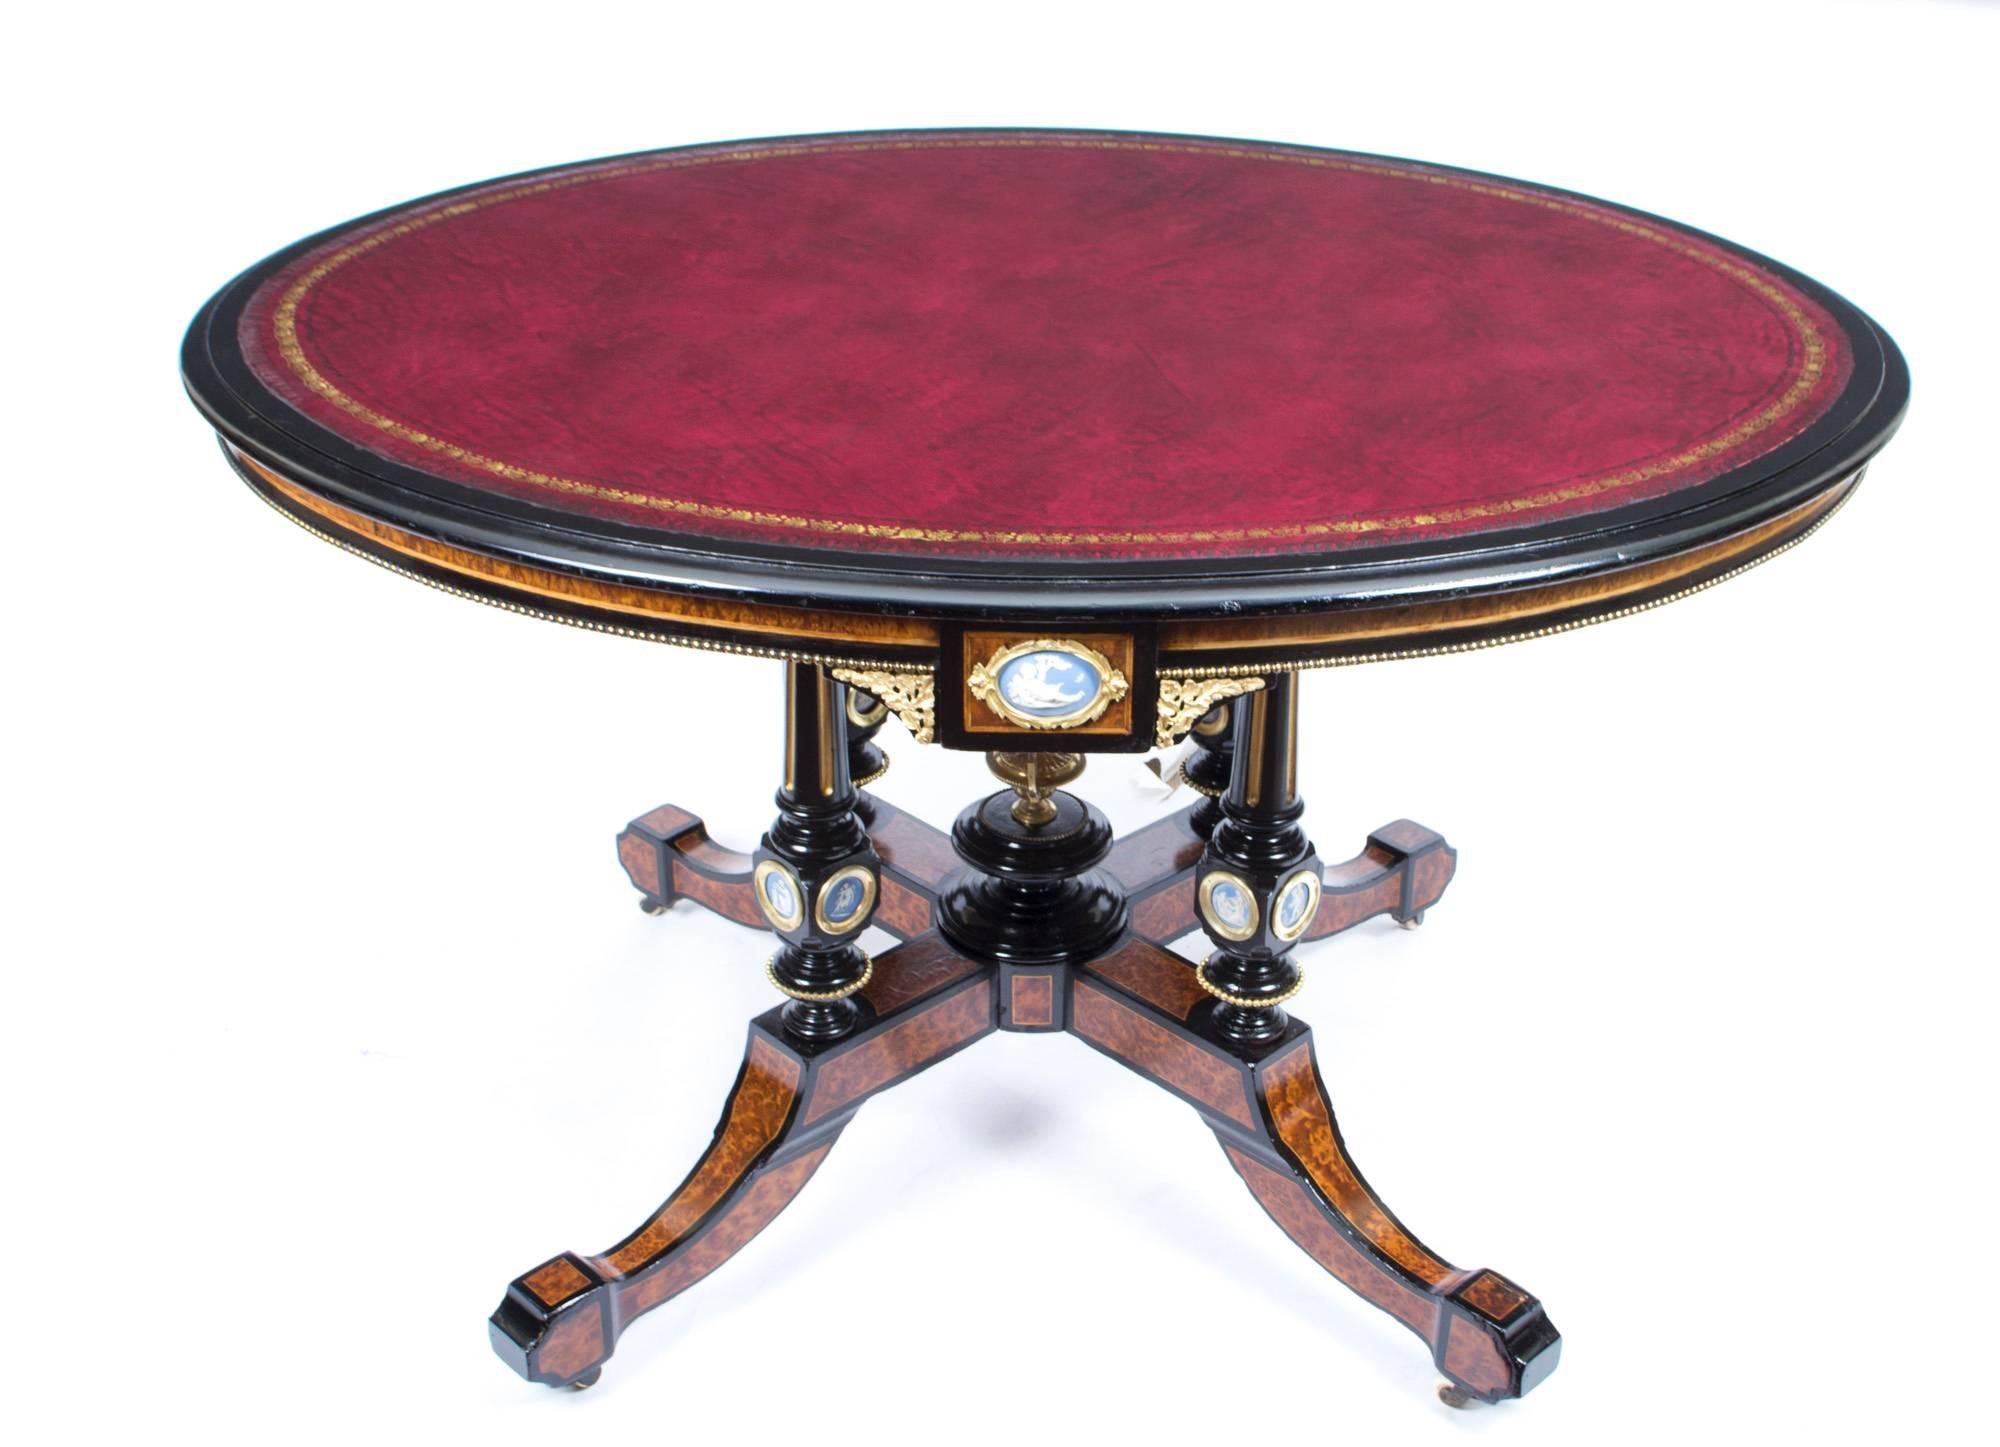 We are very pleased to be able to offer for sale this Victorian Antique Library Table or Centre Table with Jasperware Plaques dating from around 1880.     

This Antique Library Table has been very skillfully made by an accomplished craftsman using